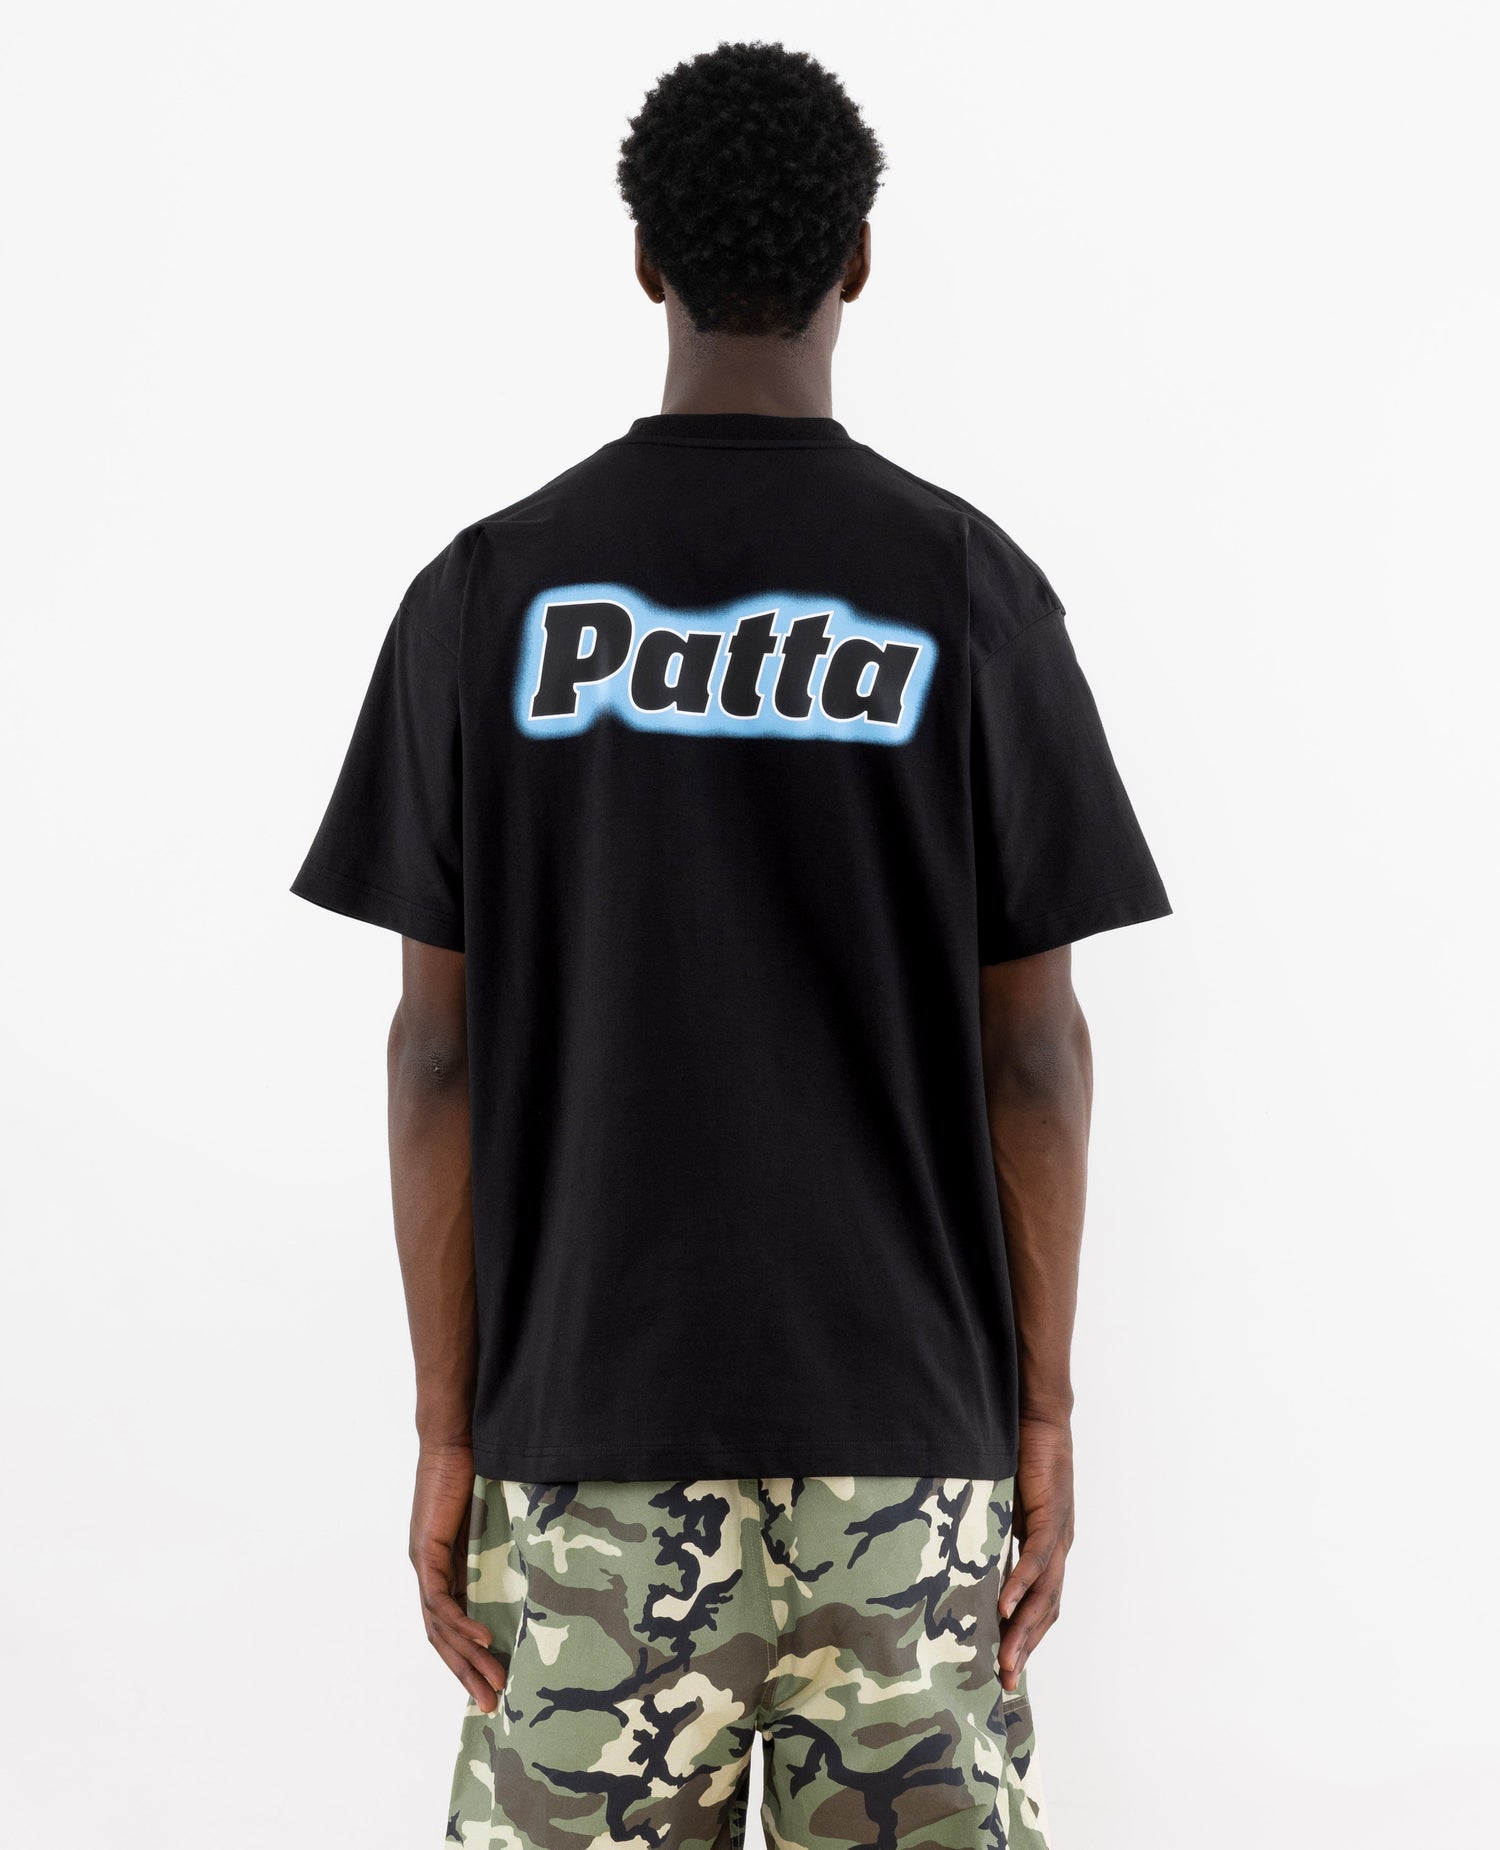 Patta It Does Matter What You Think T-Shirt (Black)